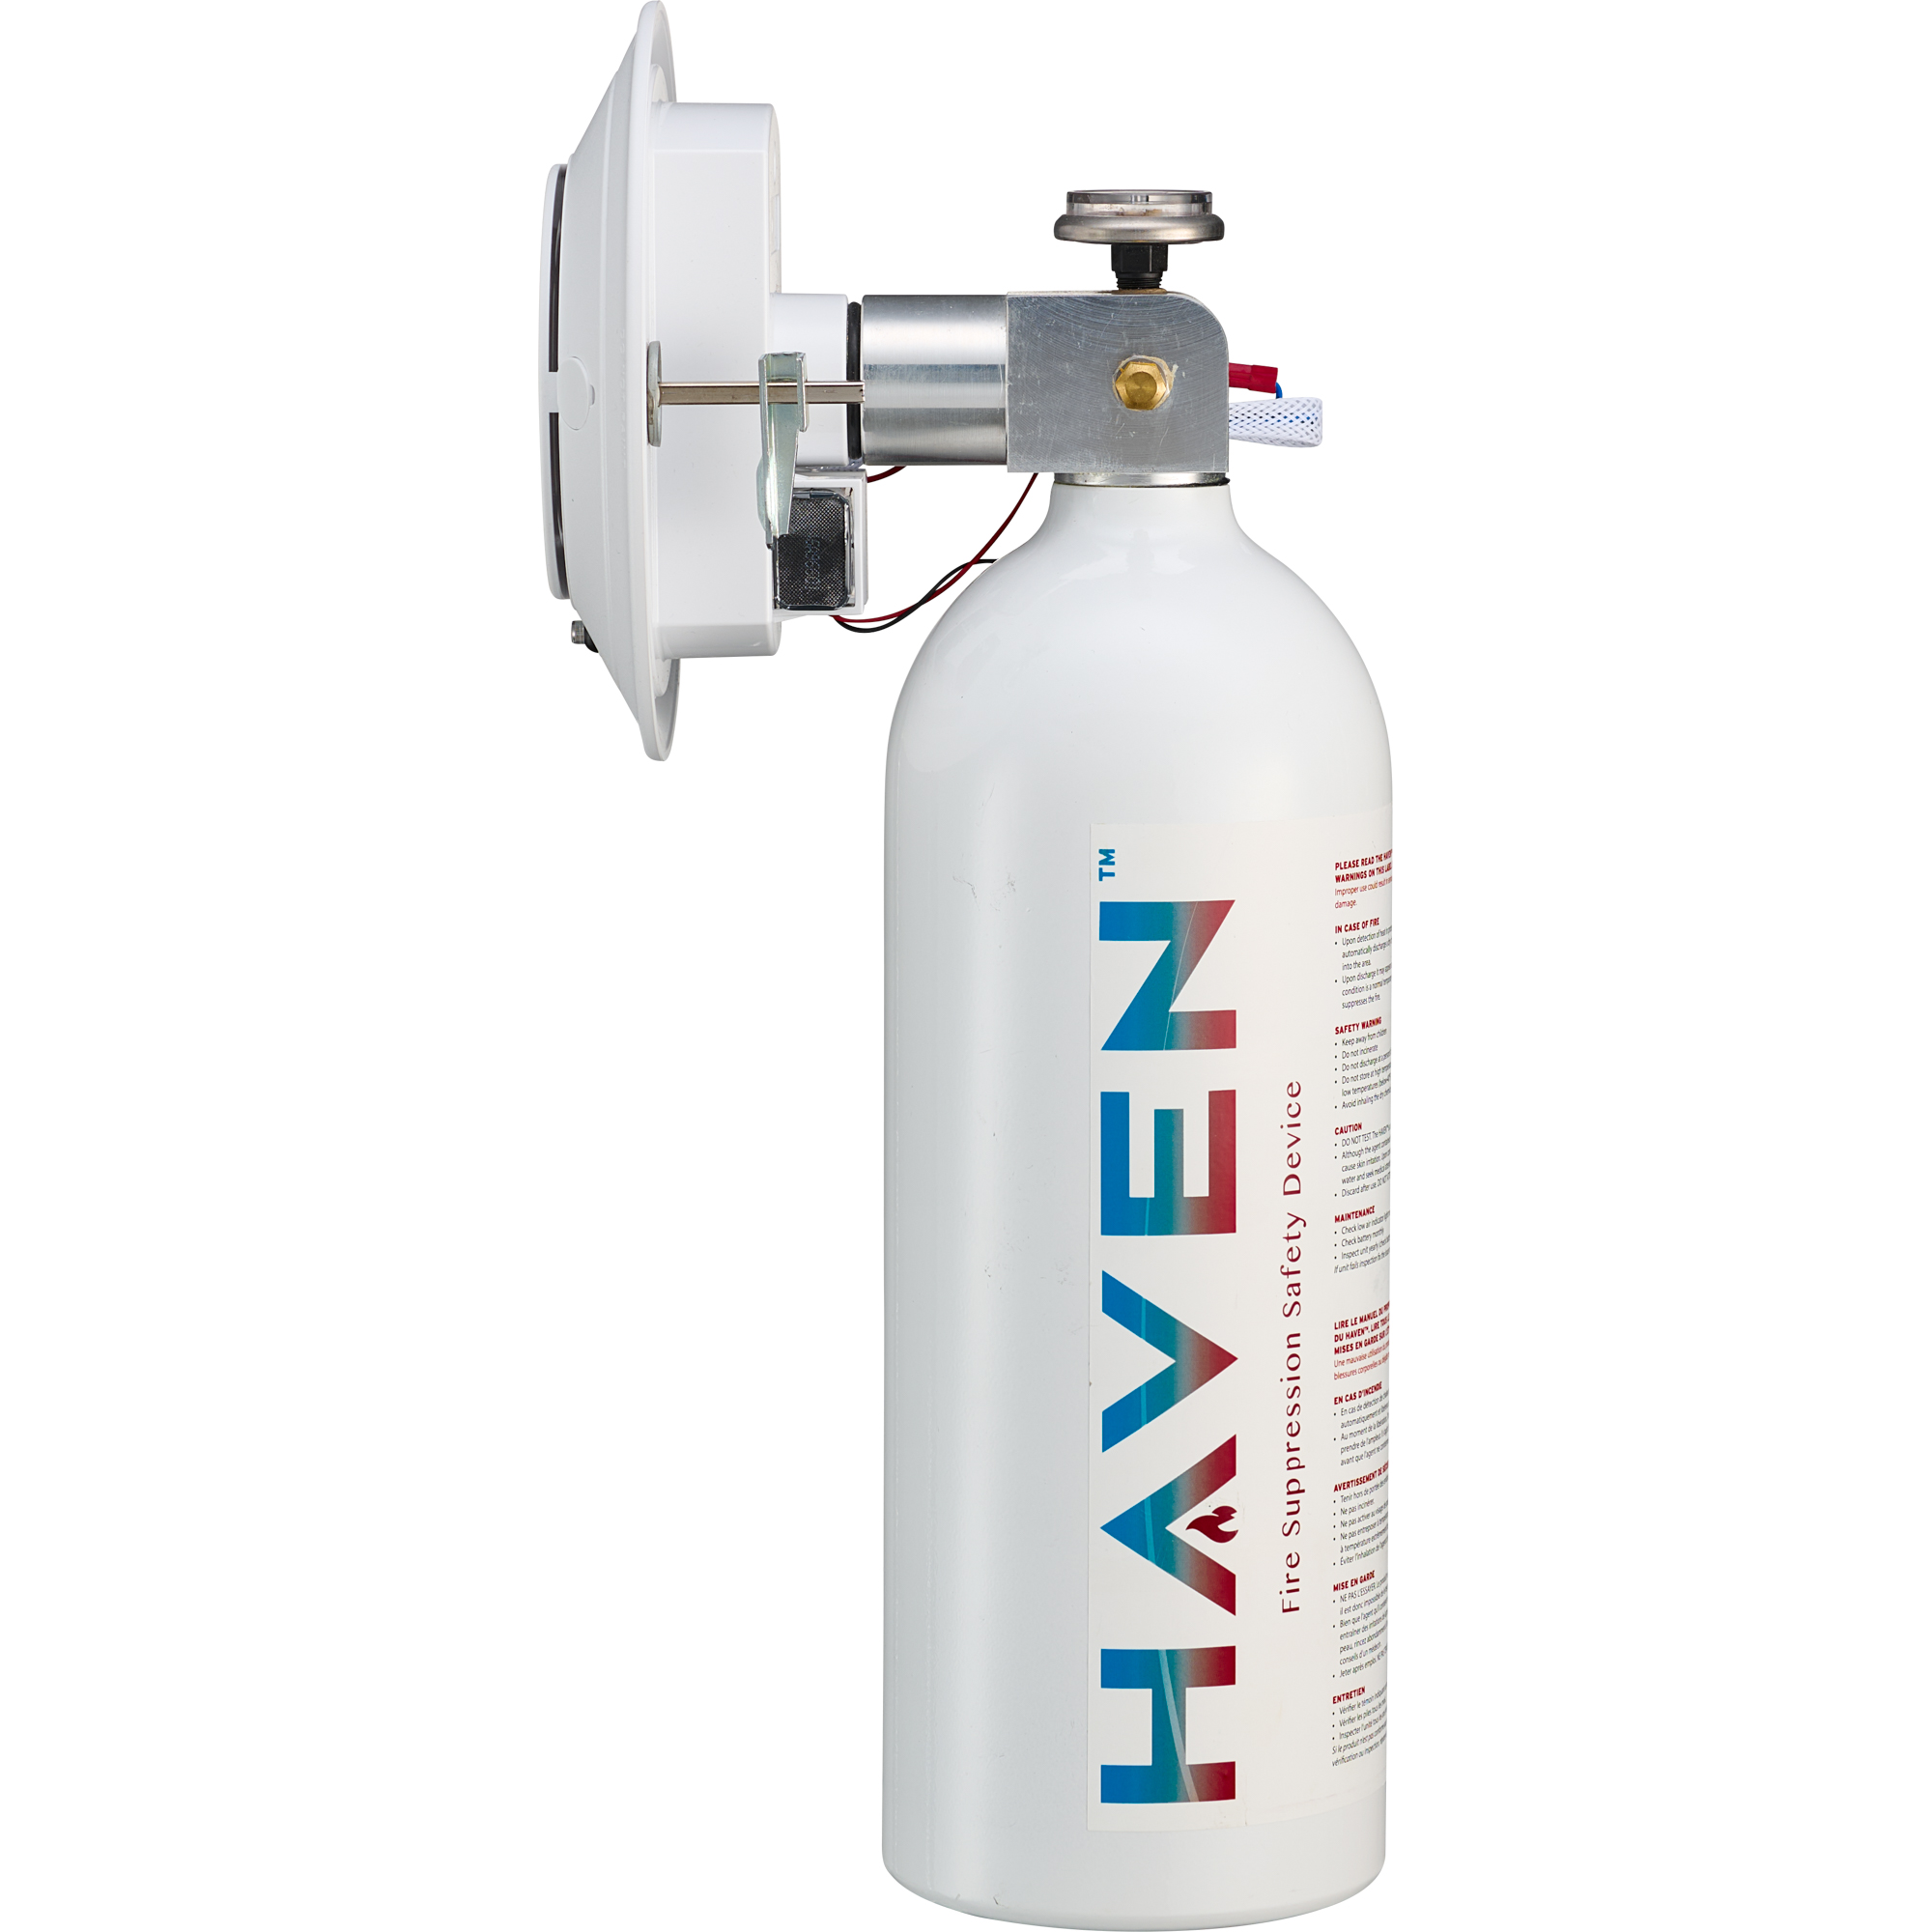 HAVEN Fire Suppression Safety Device 155F - 68C Rated (PREORDER)